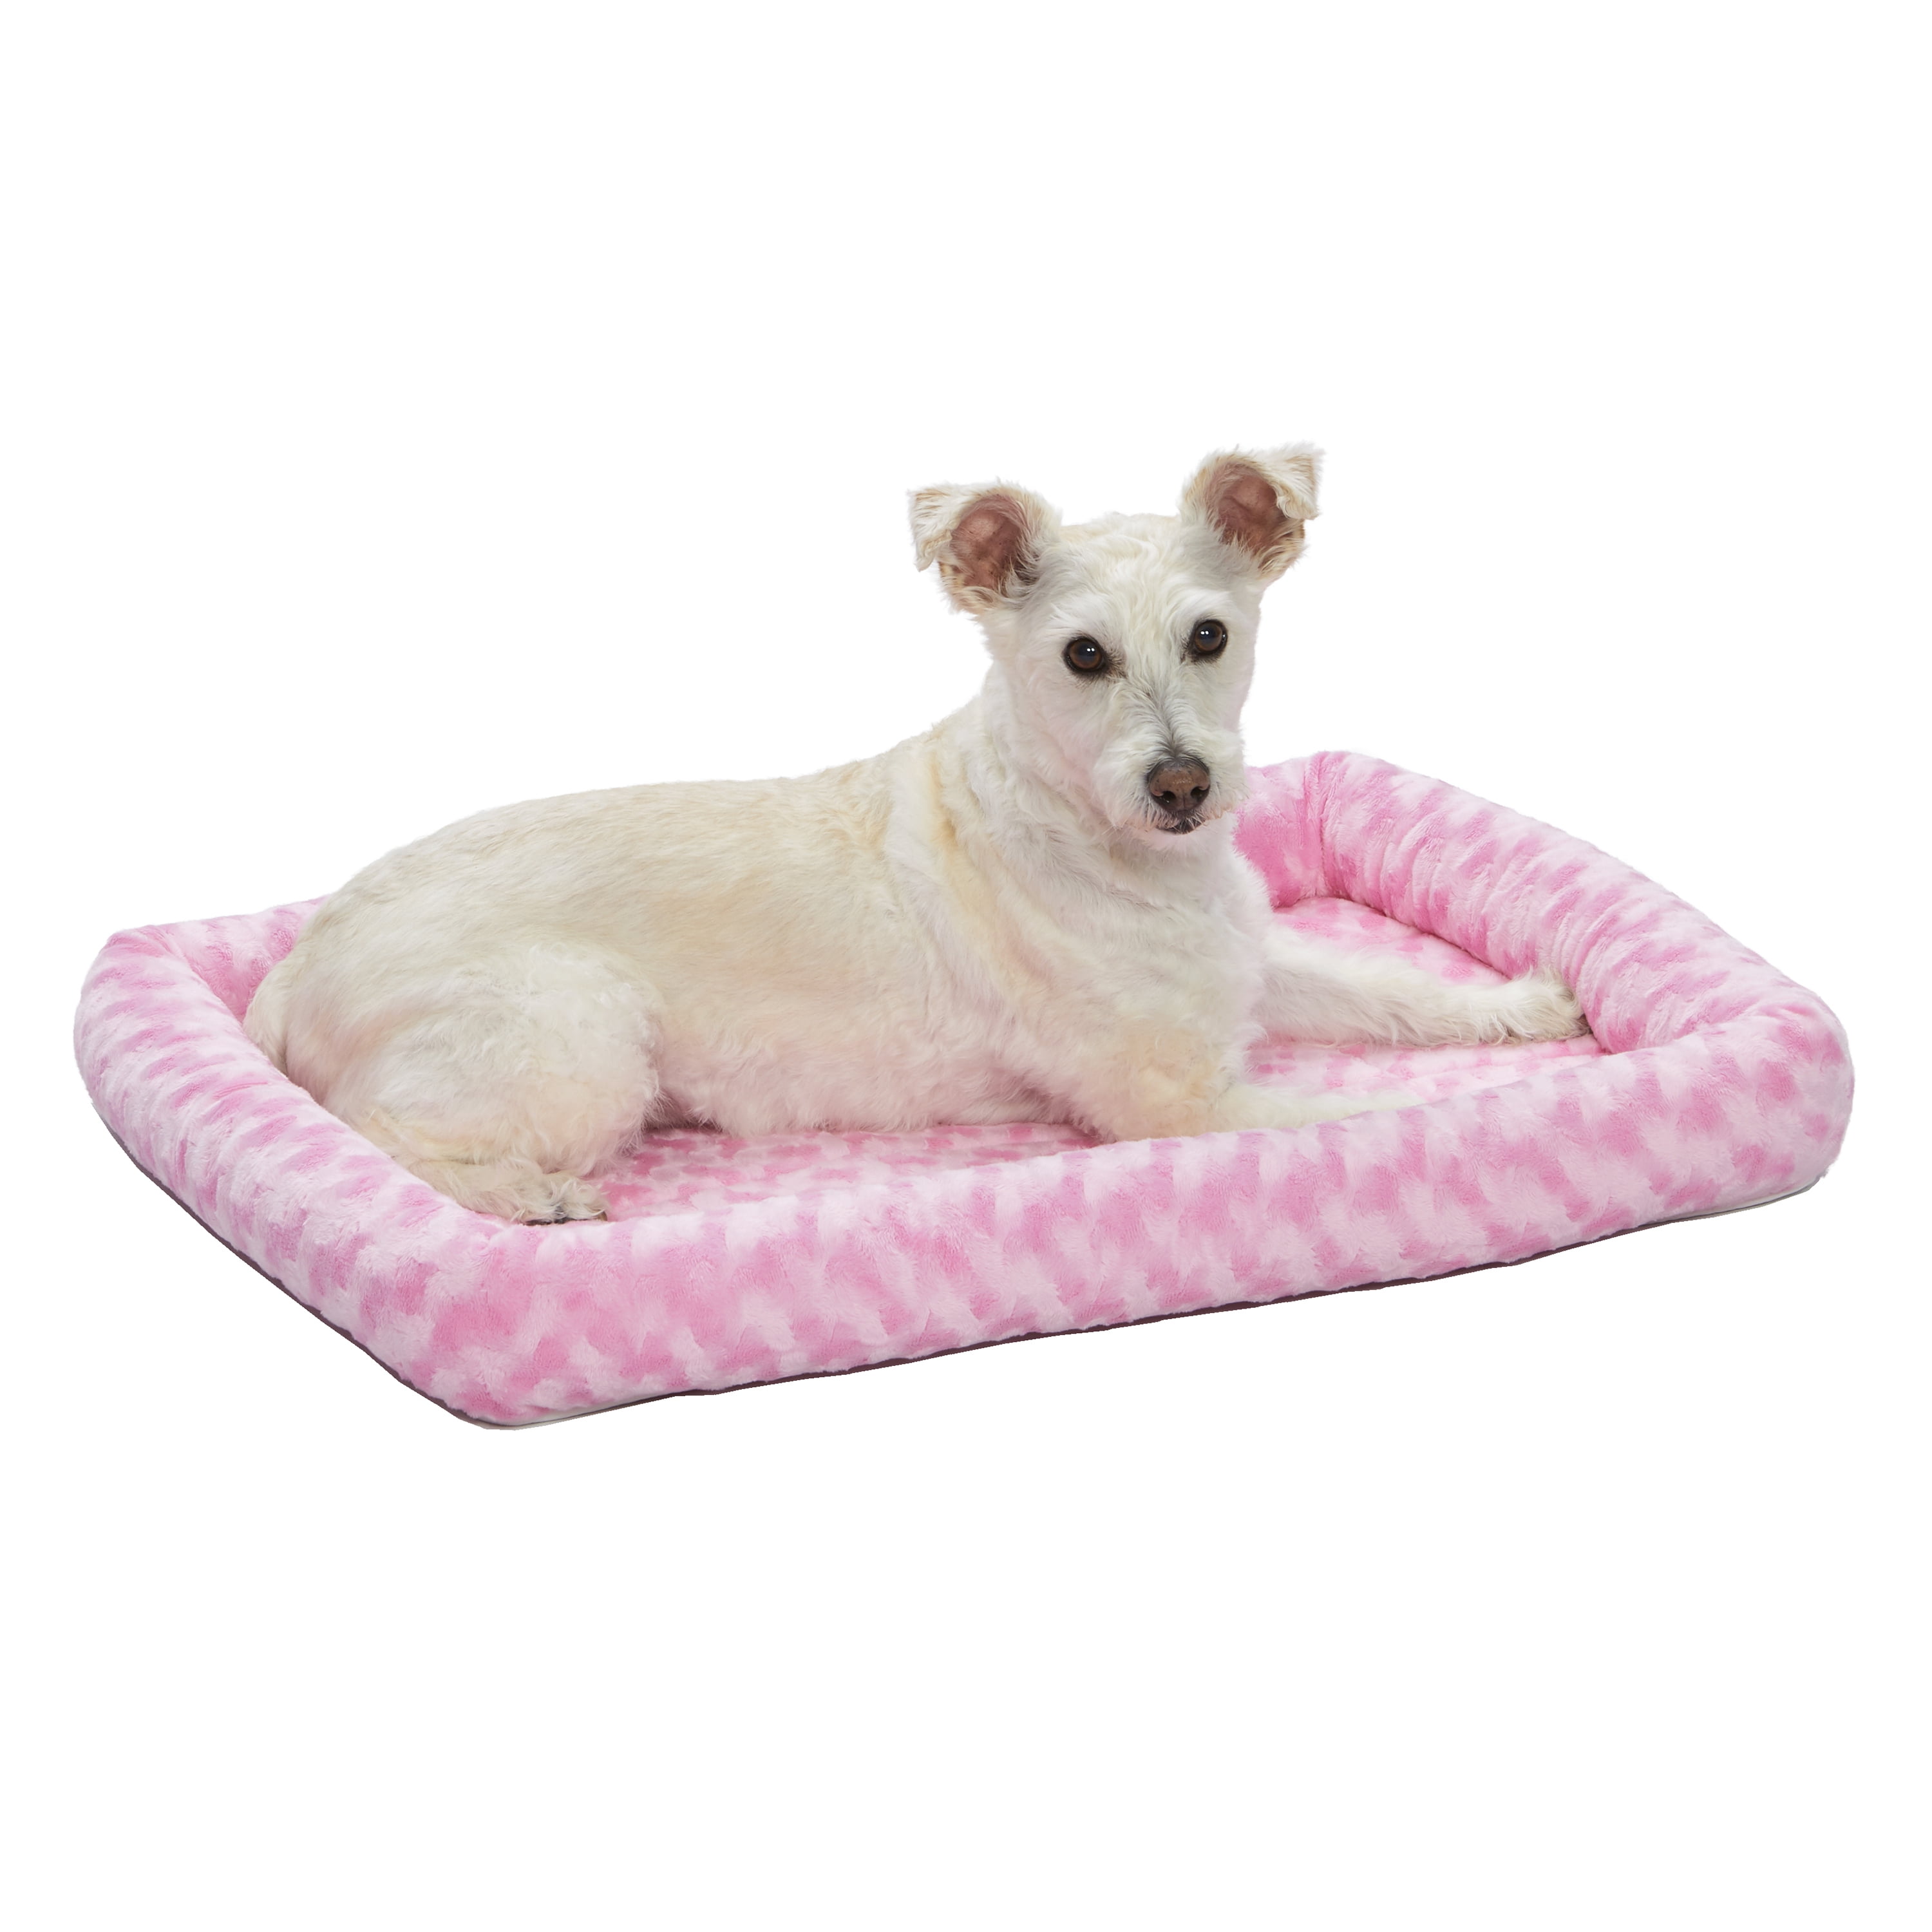 Arrives by Tue, Oct 5 Buy Quiet Time Midwest Padded Bolster Dog Bed, Pink, ...